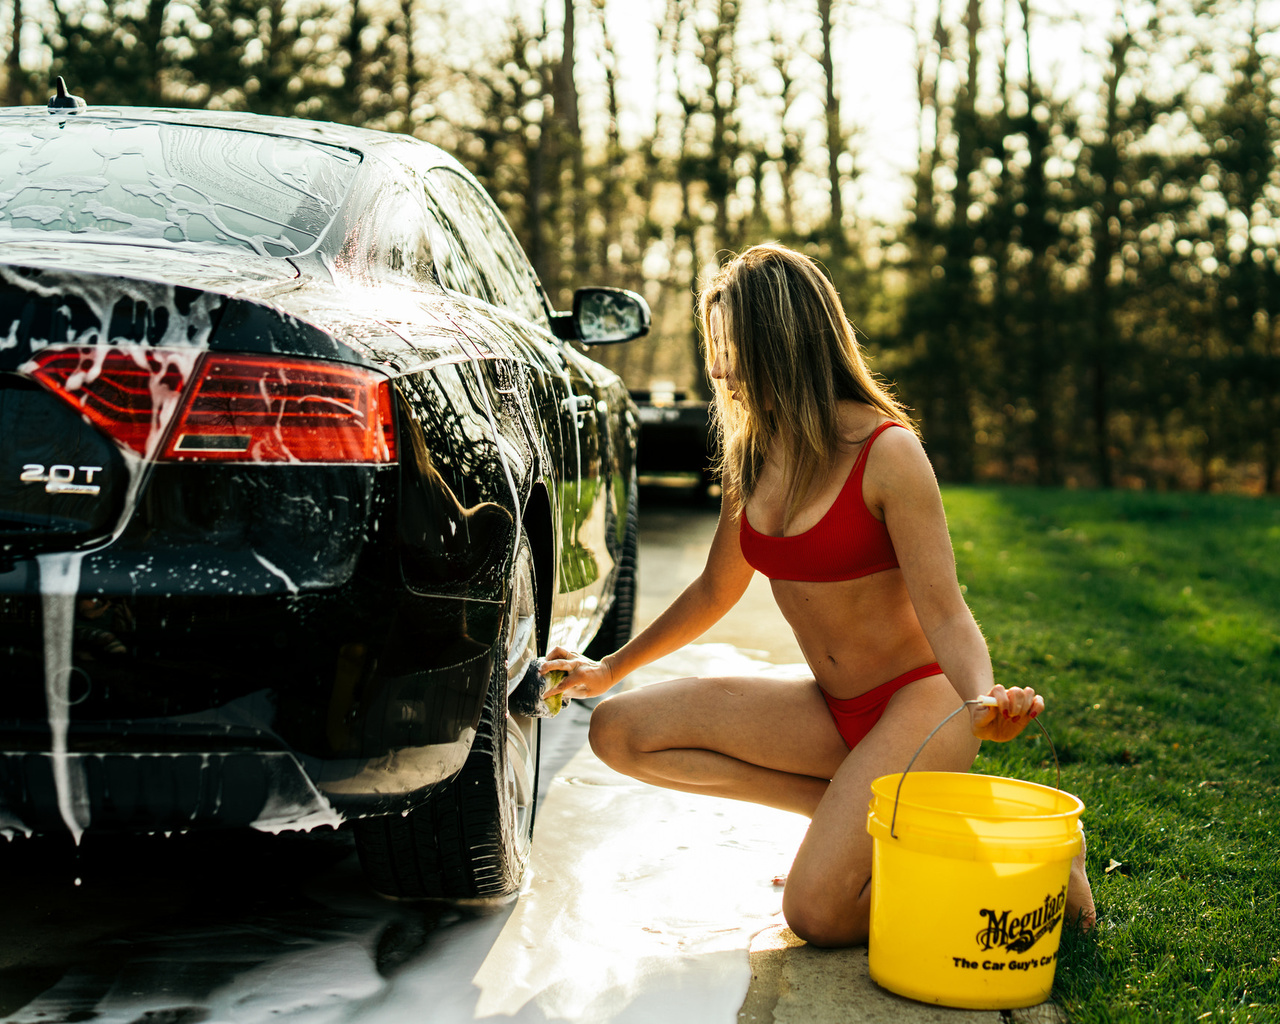 women, car washes, blonde, women with cars, women outdoors, belly, swimwear, brunette, grass, trees, red nails, red tops, bucket, soap, kneeling